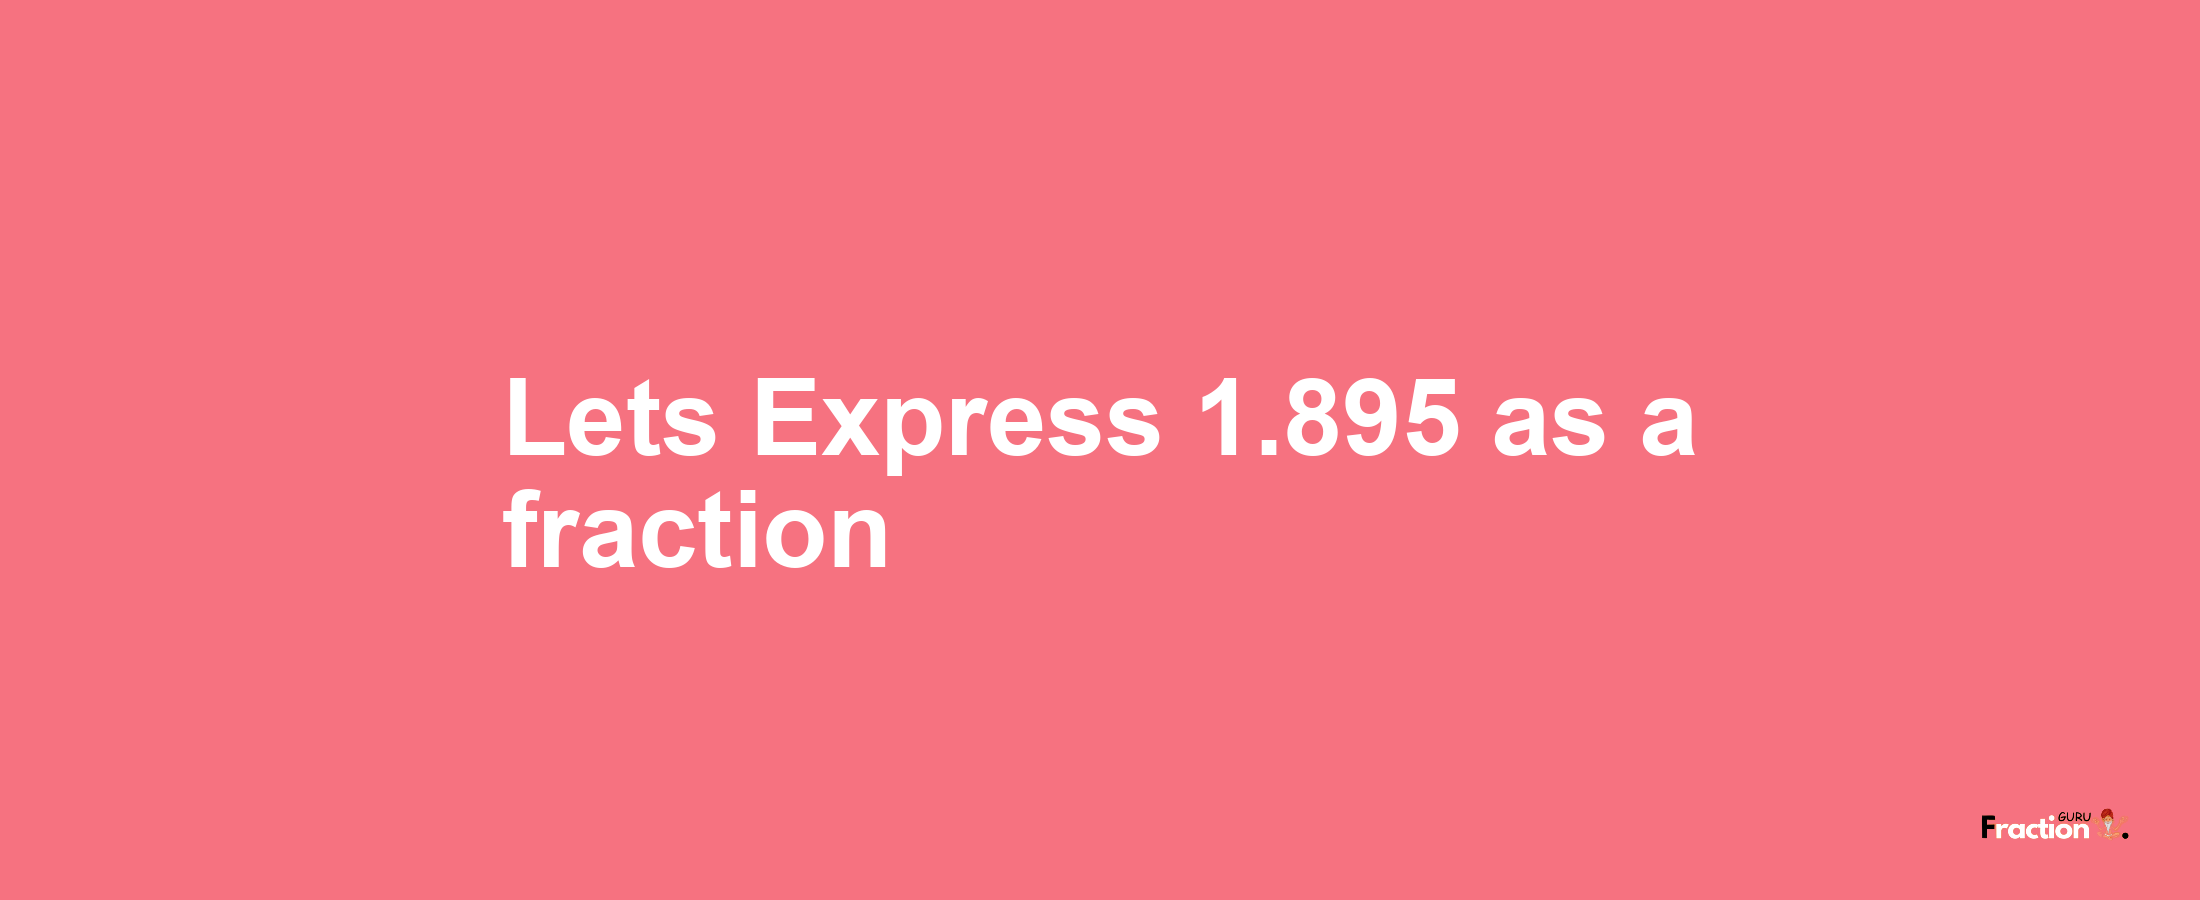 Lets Express 1.895 as afraction